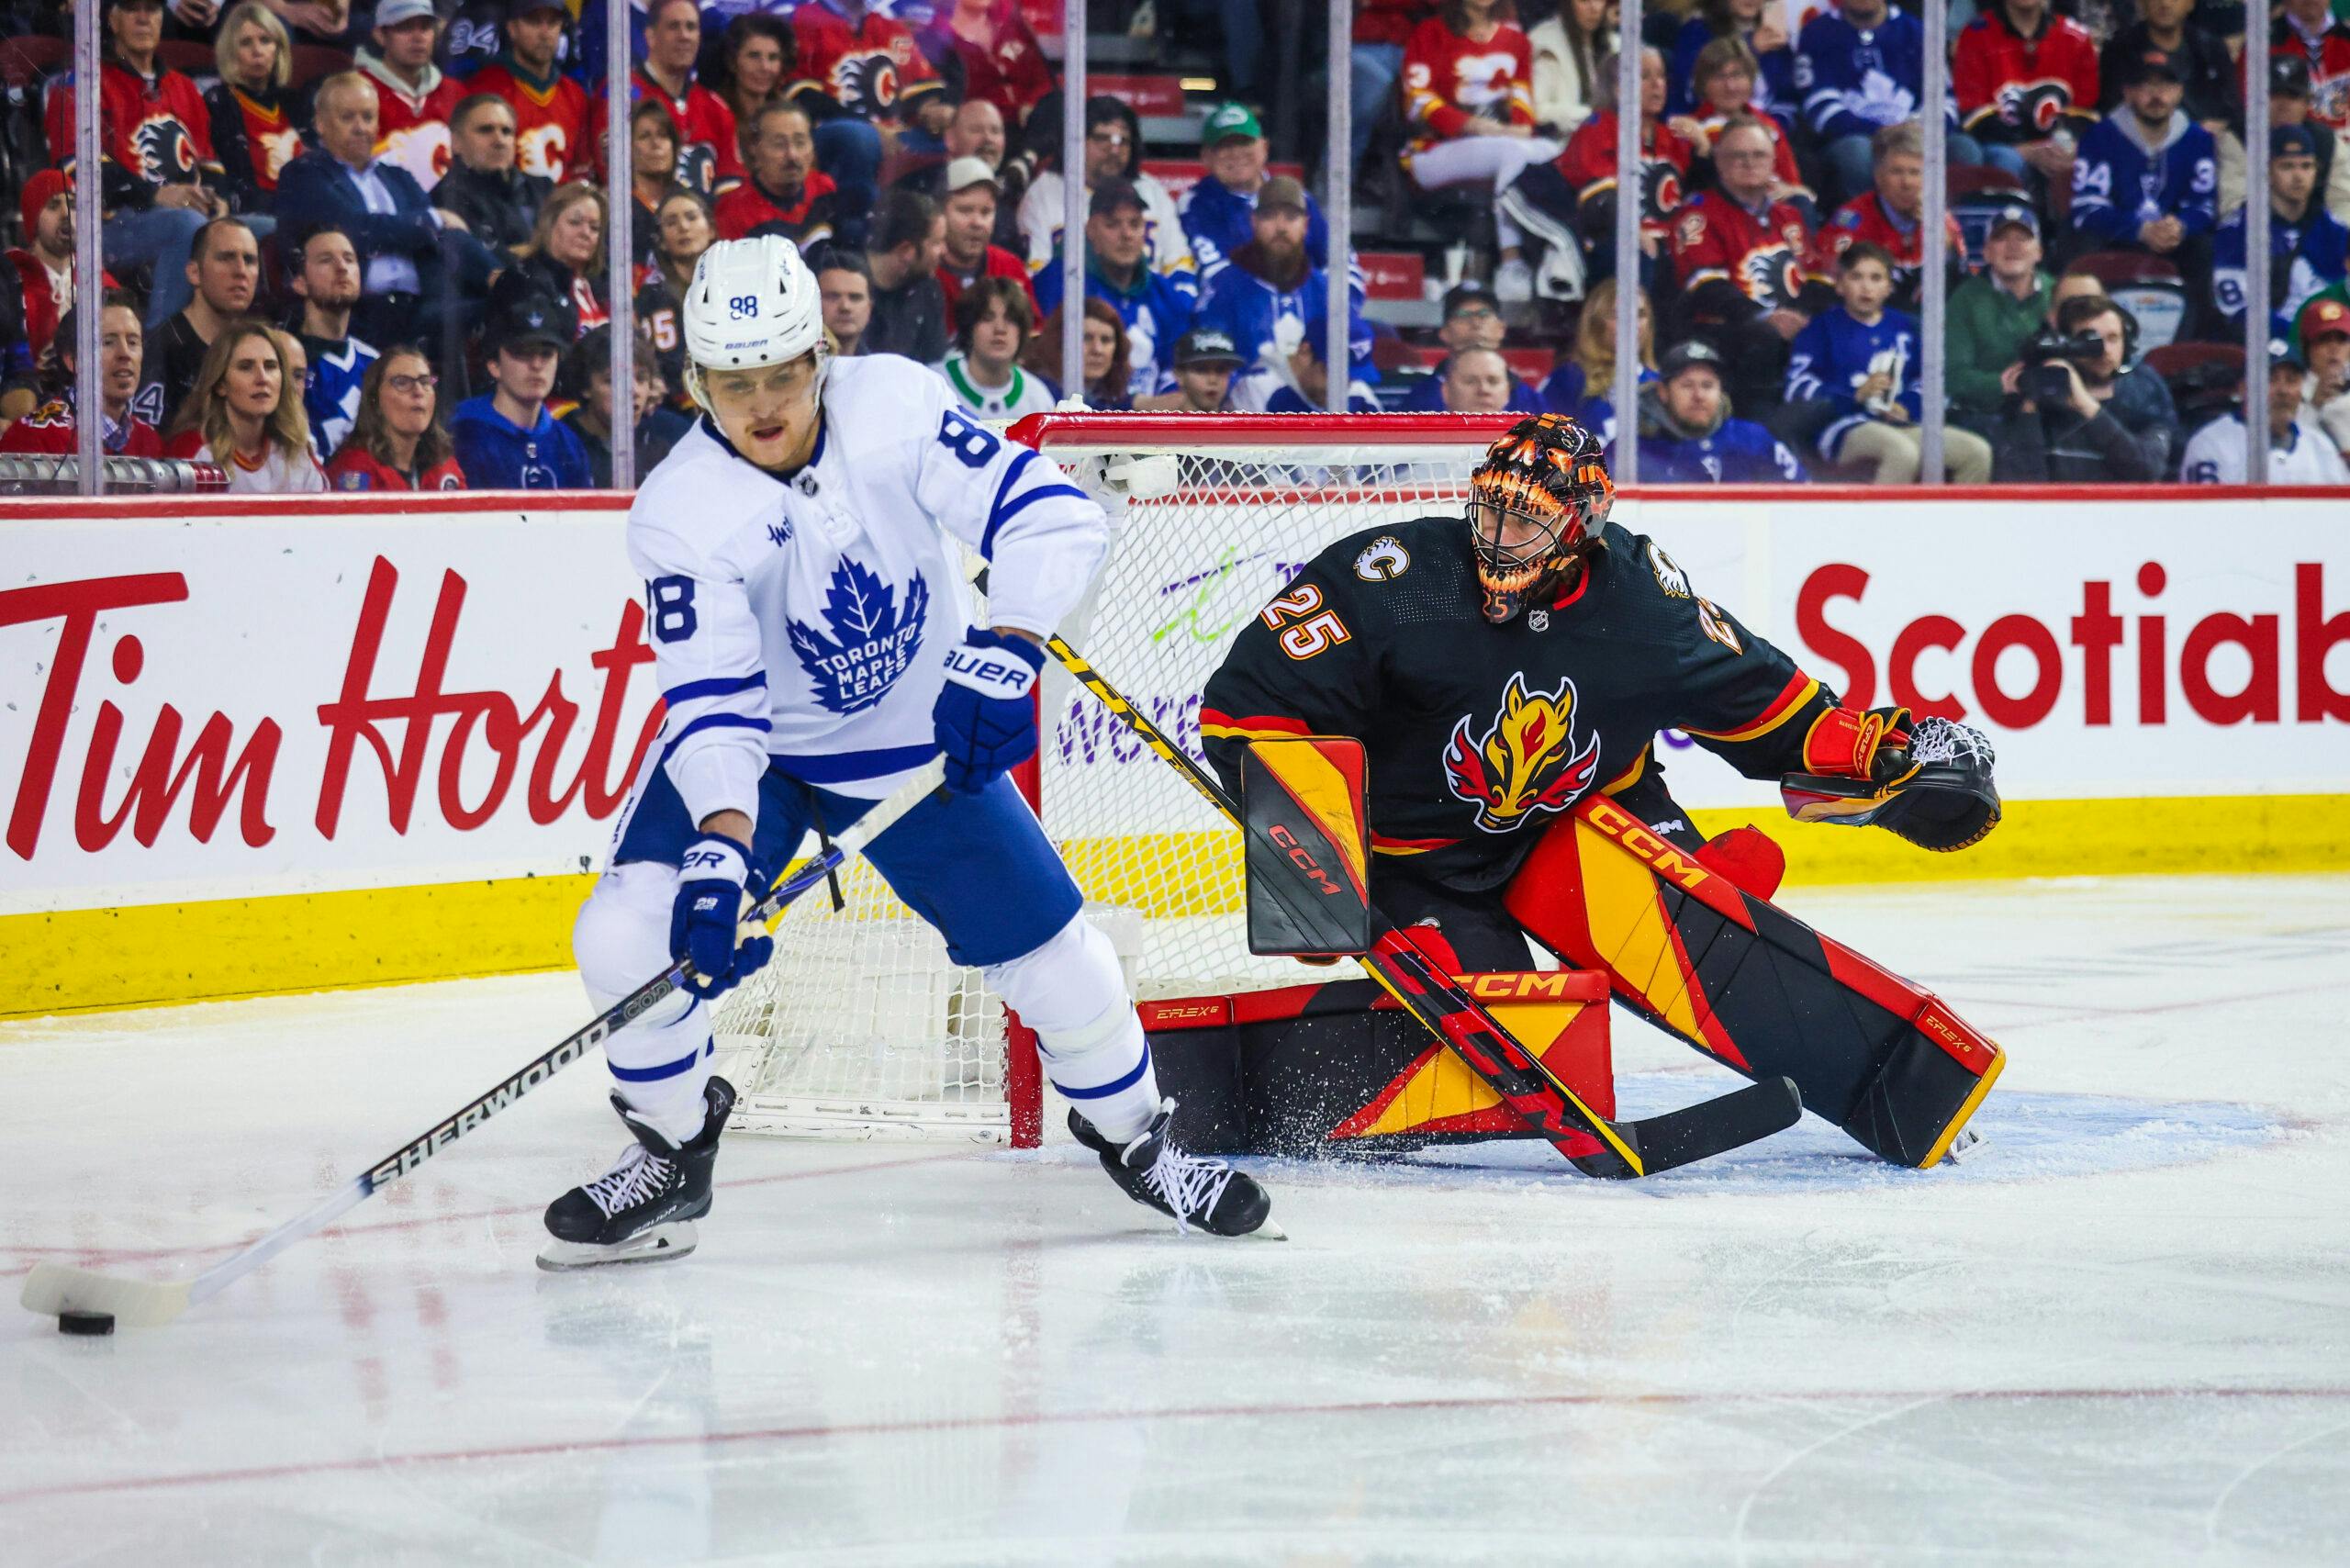 William Nylander of the Toronto Maple Leafs and Jacob Markstrom of the Calgary Flames.